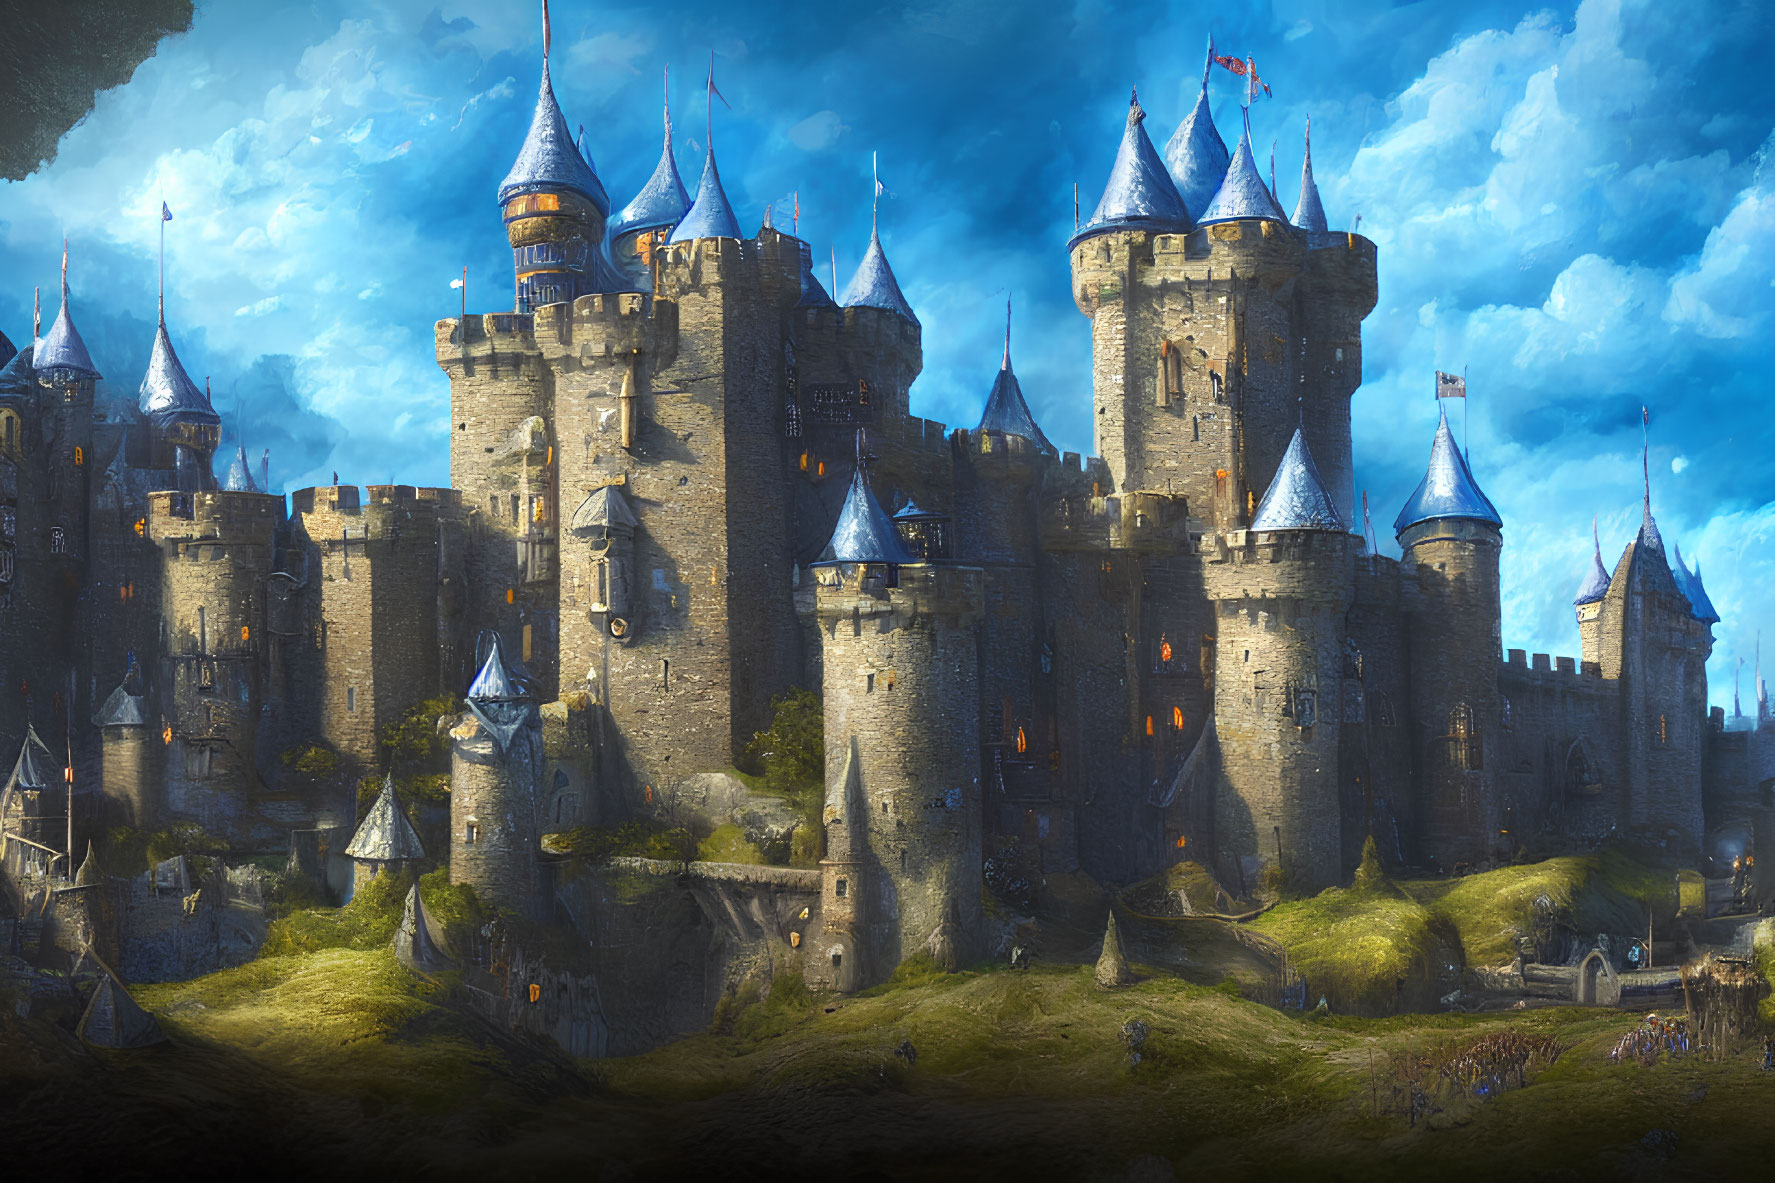 Medieval castle with spires and towers under warm light against blue skies